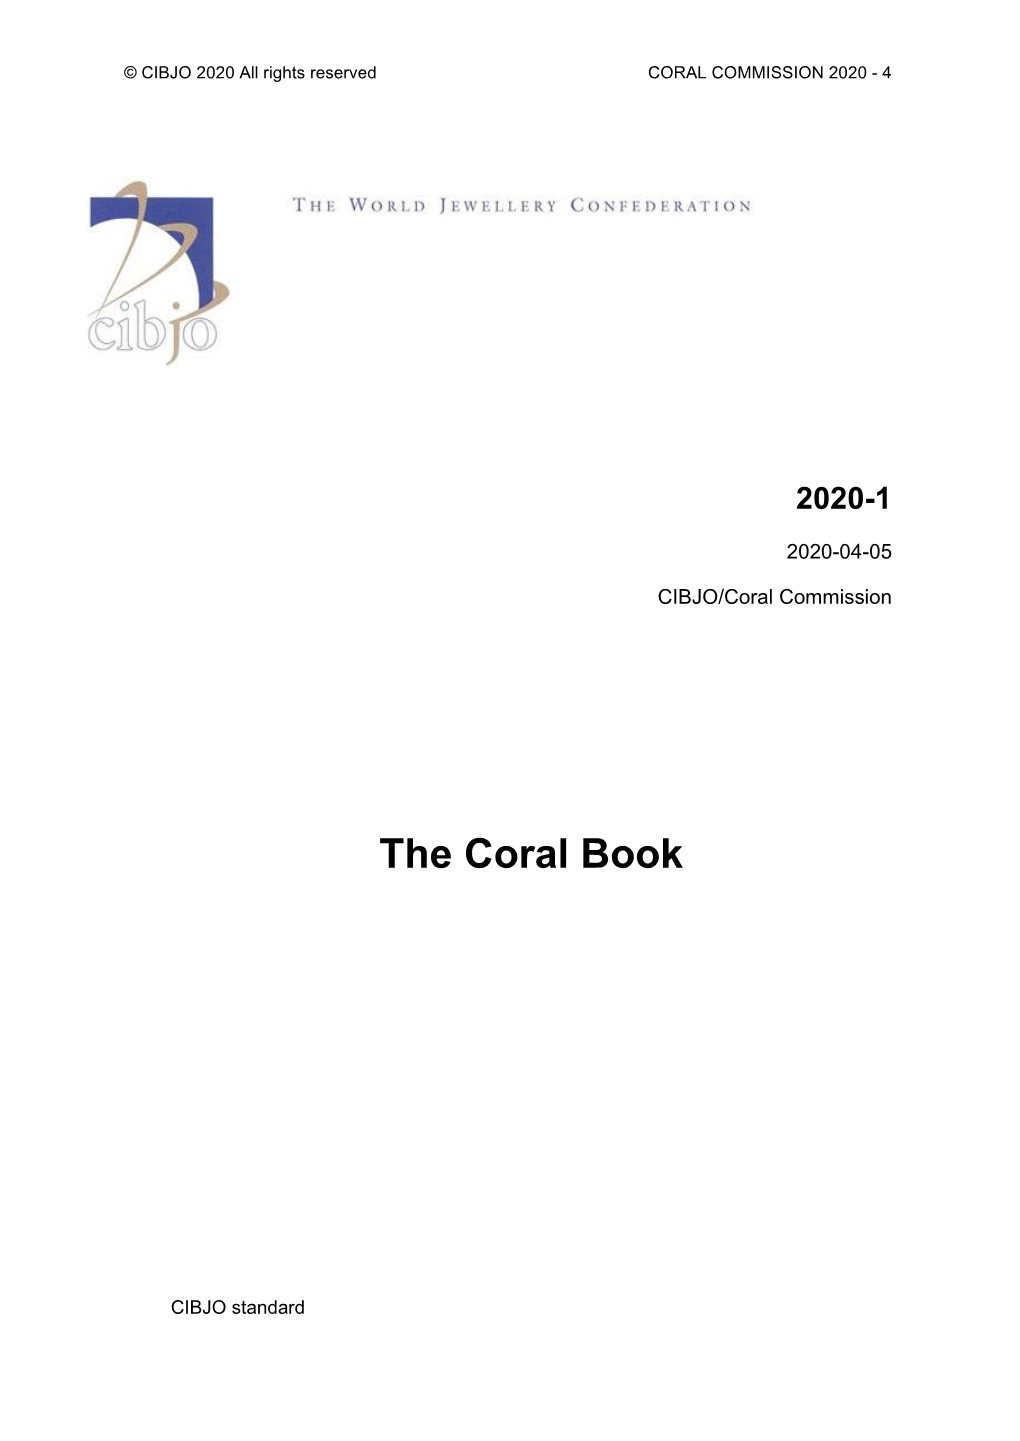 The Coral Book